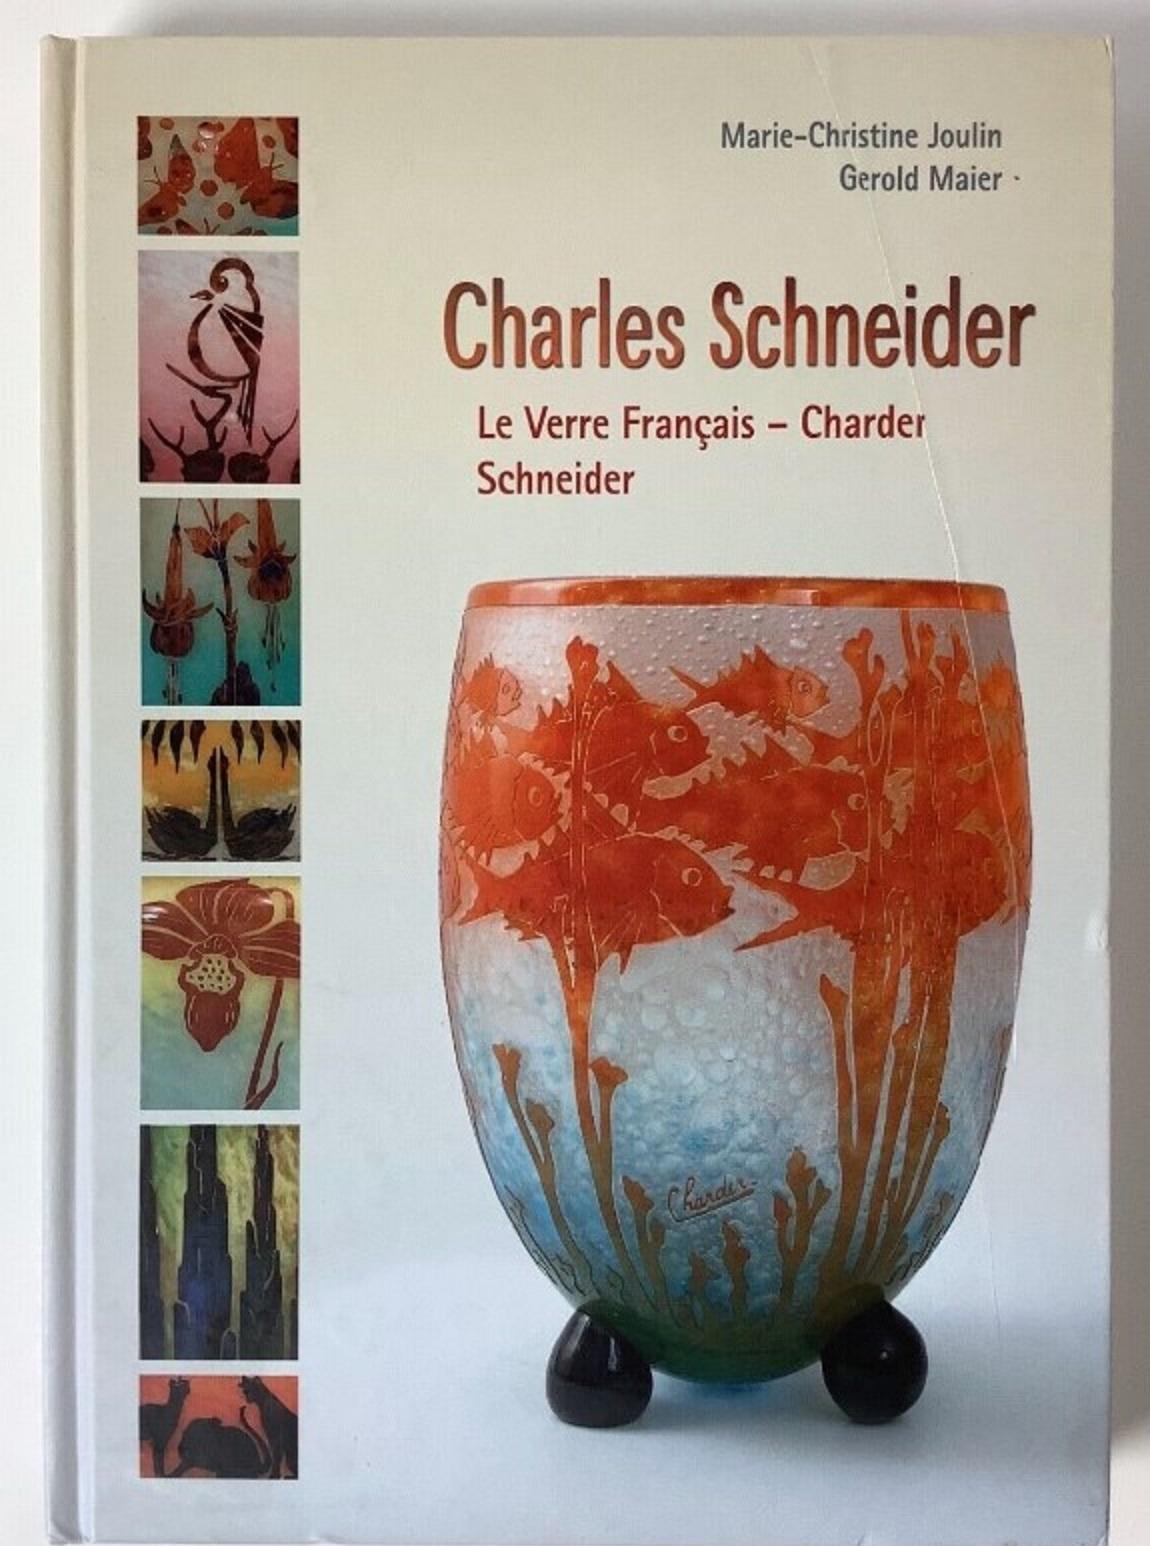 Vase Le Verre Francais 
Page: 99 book Schneider Maître Verrier
Author: Olivier Ador
acid worked
Le Verre cameo glass was a separate line of art glass designed by Charles Schneider. Its production was made at the same time as the Schneider designed